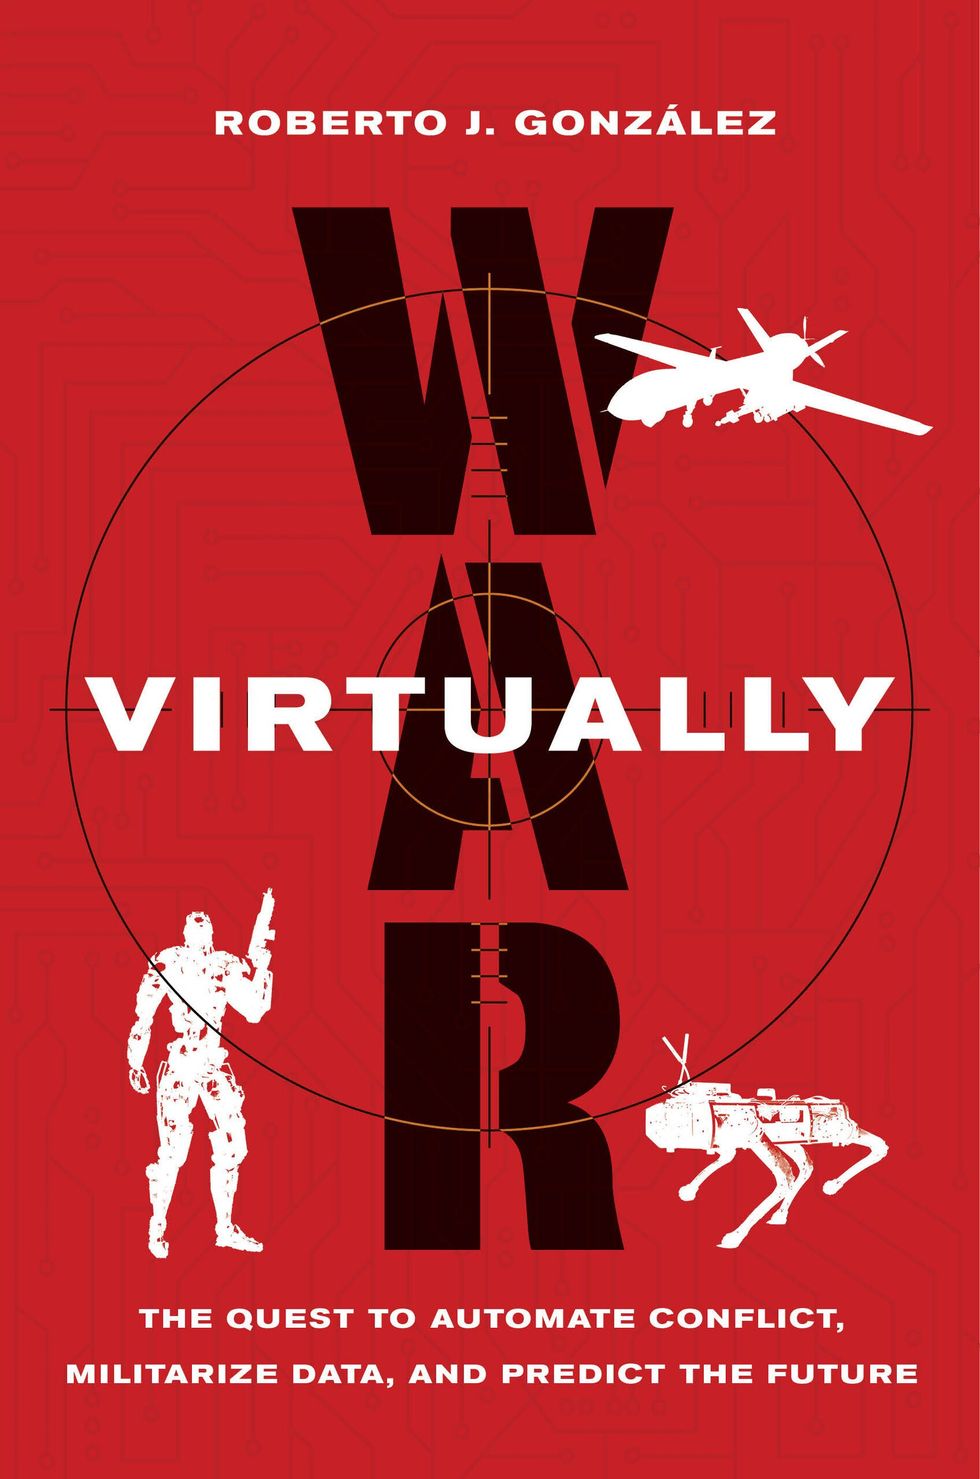 A red book cover shows the crosshairs of a target surrounded by images of robots and drones.